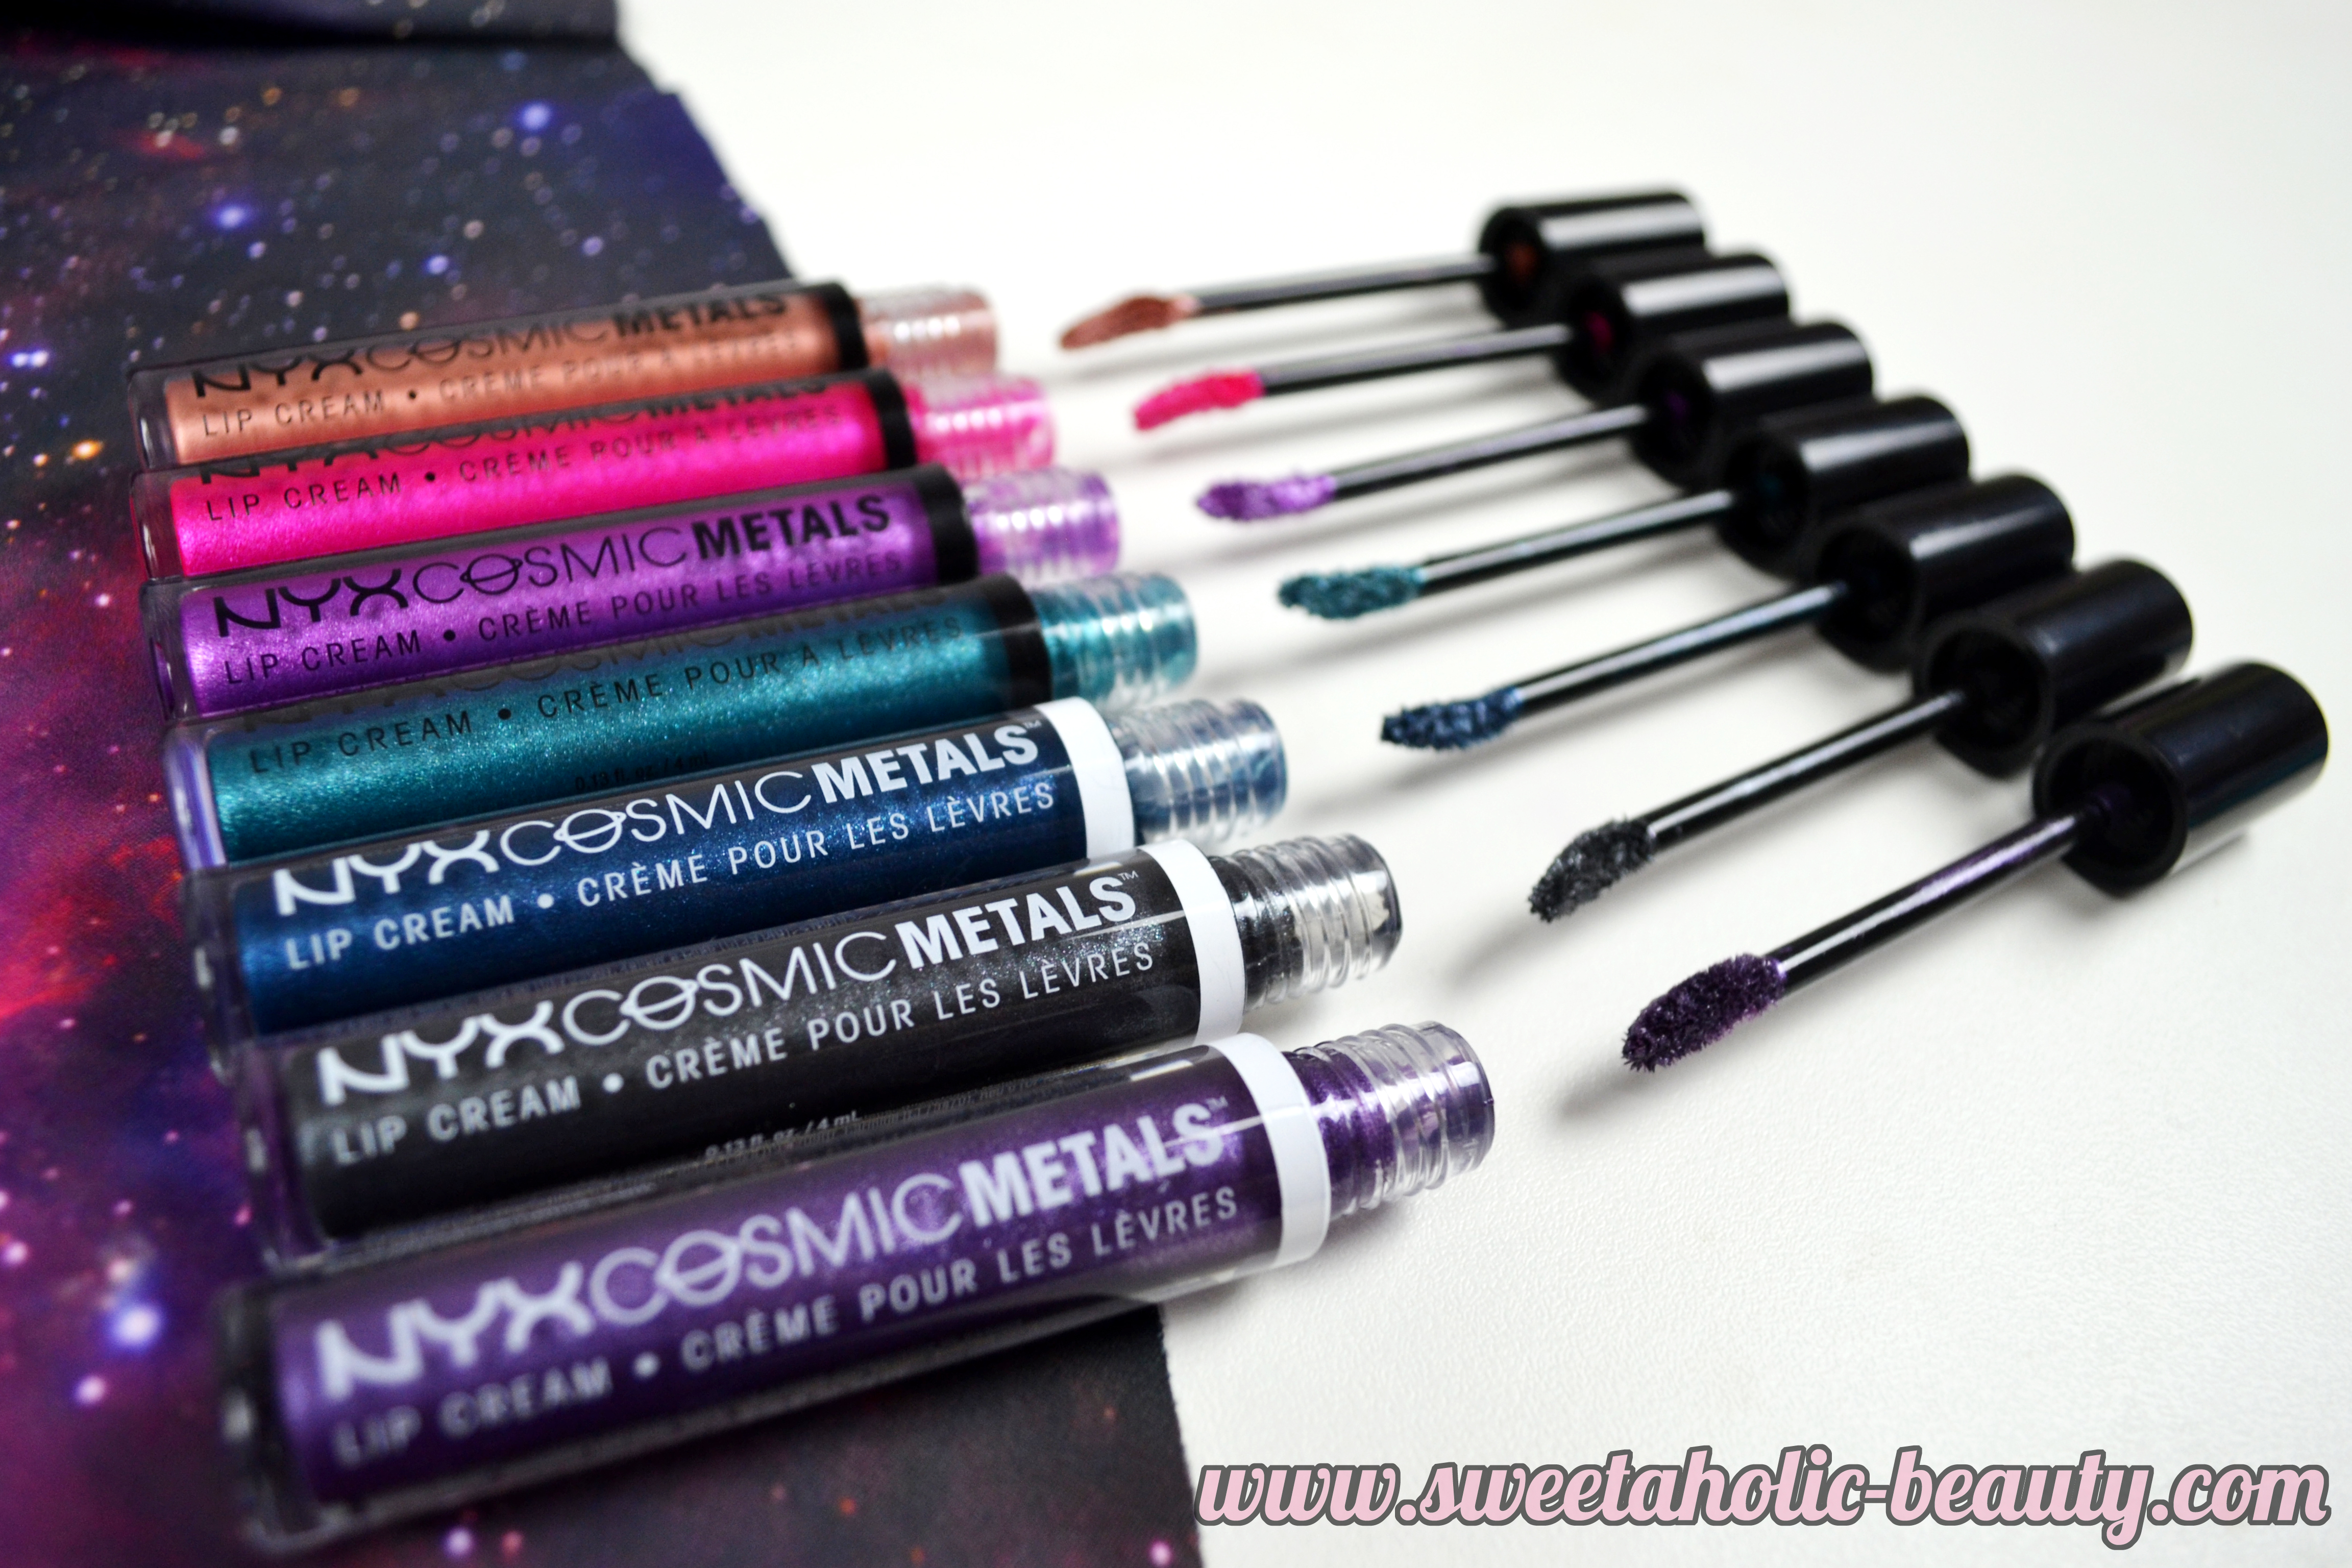 NYX Cosmetics Cosmic Metals Review & Swatches - Sweetaholic Beauty